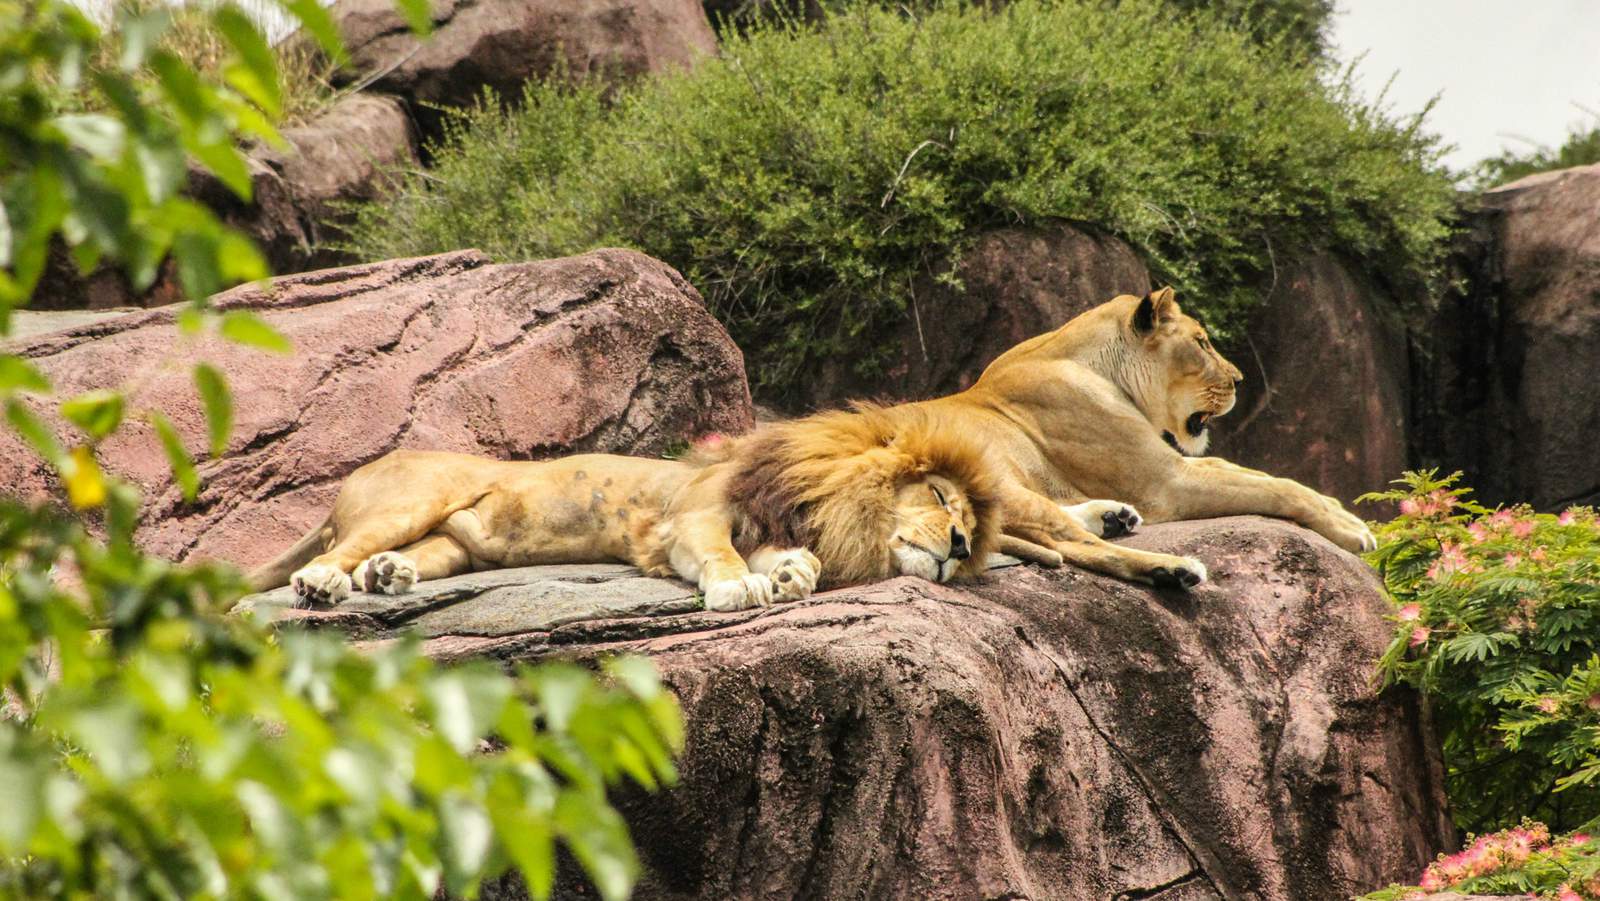 Detroit Zoo to reopen June 8 for members, with new procedures in place